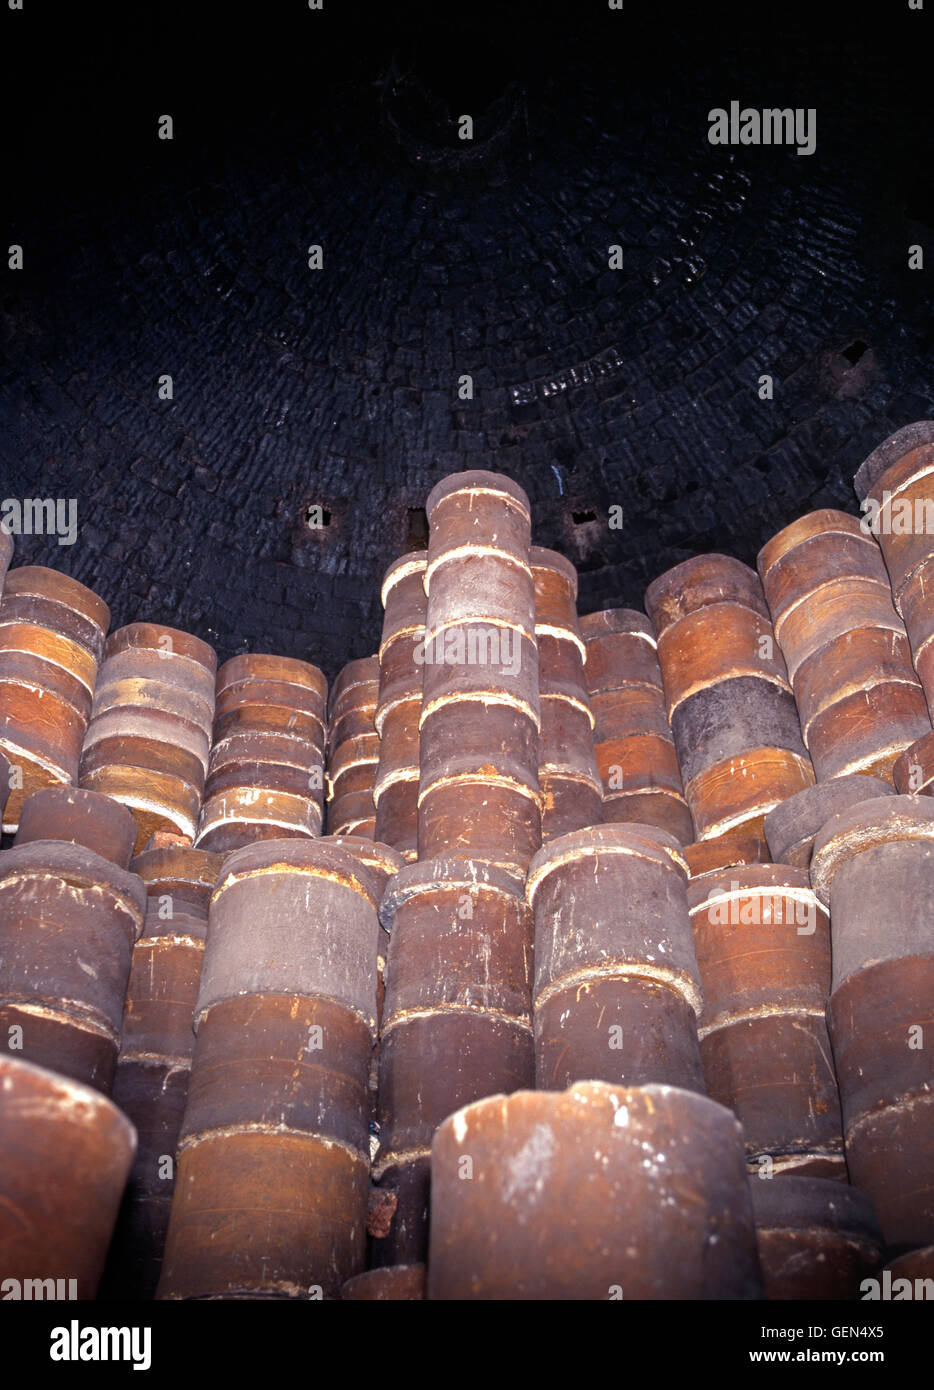 Clay pots inside a Bottle Kiln at the Gladstone Pottery Museum, Stoke on Trent, Staffordshire, England, UK, Western Europe. Stock Photo